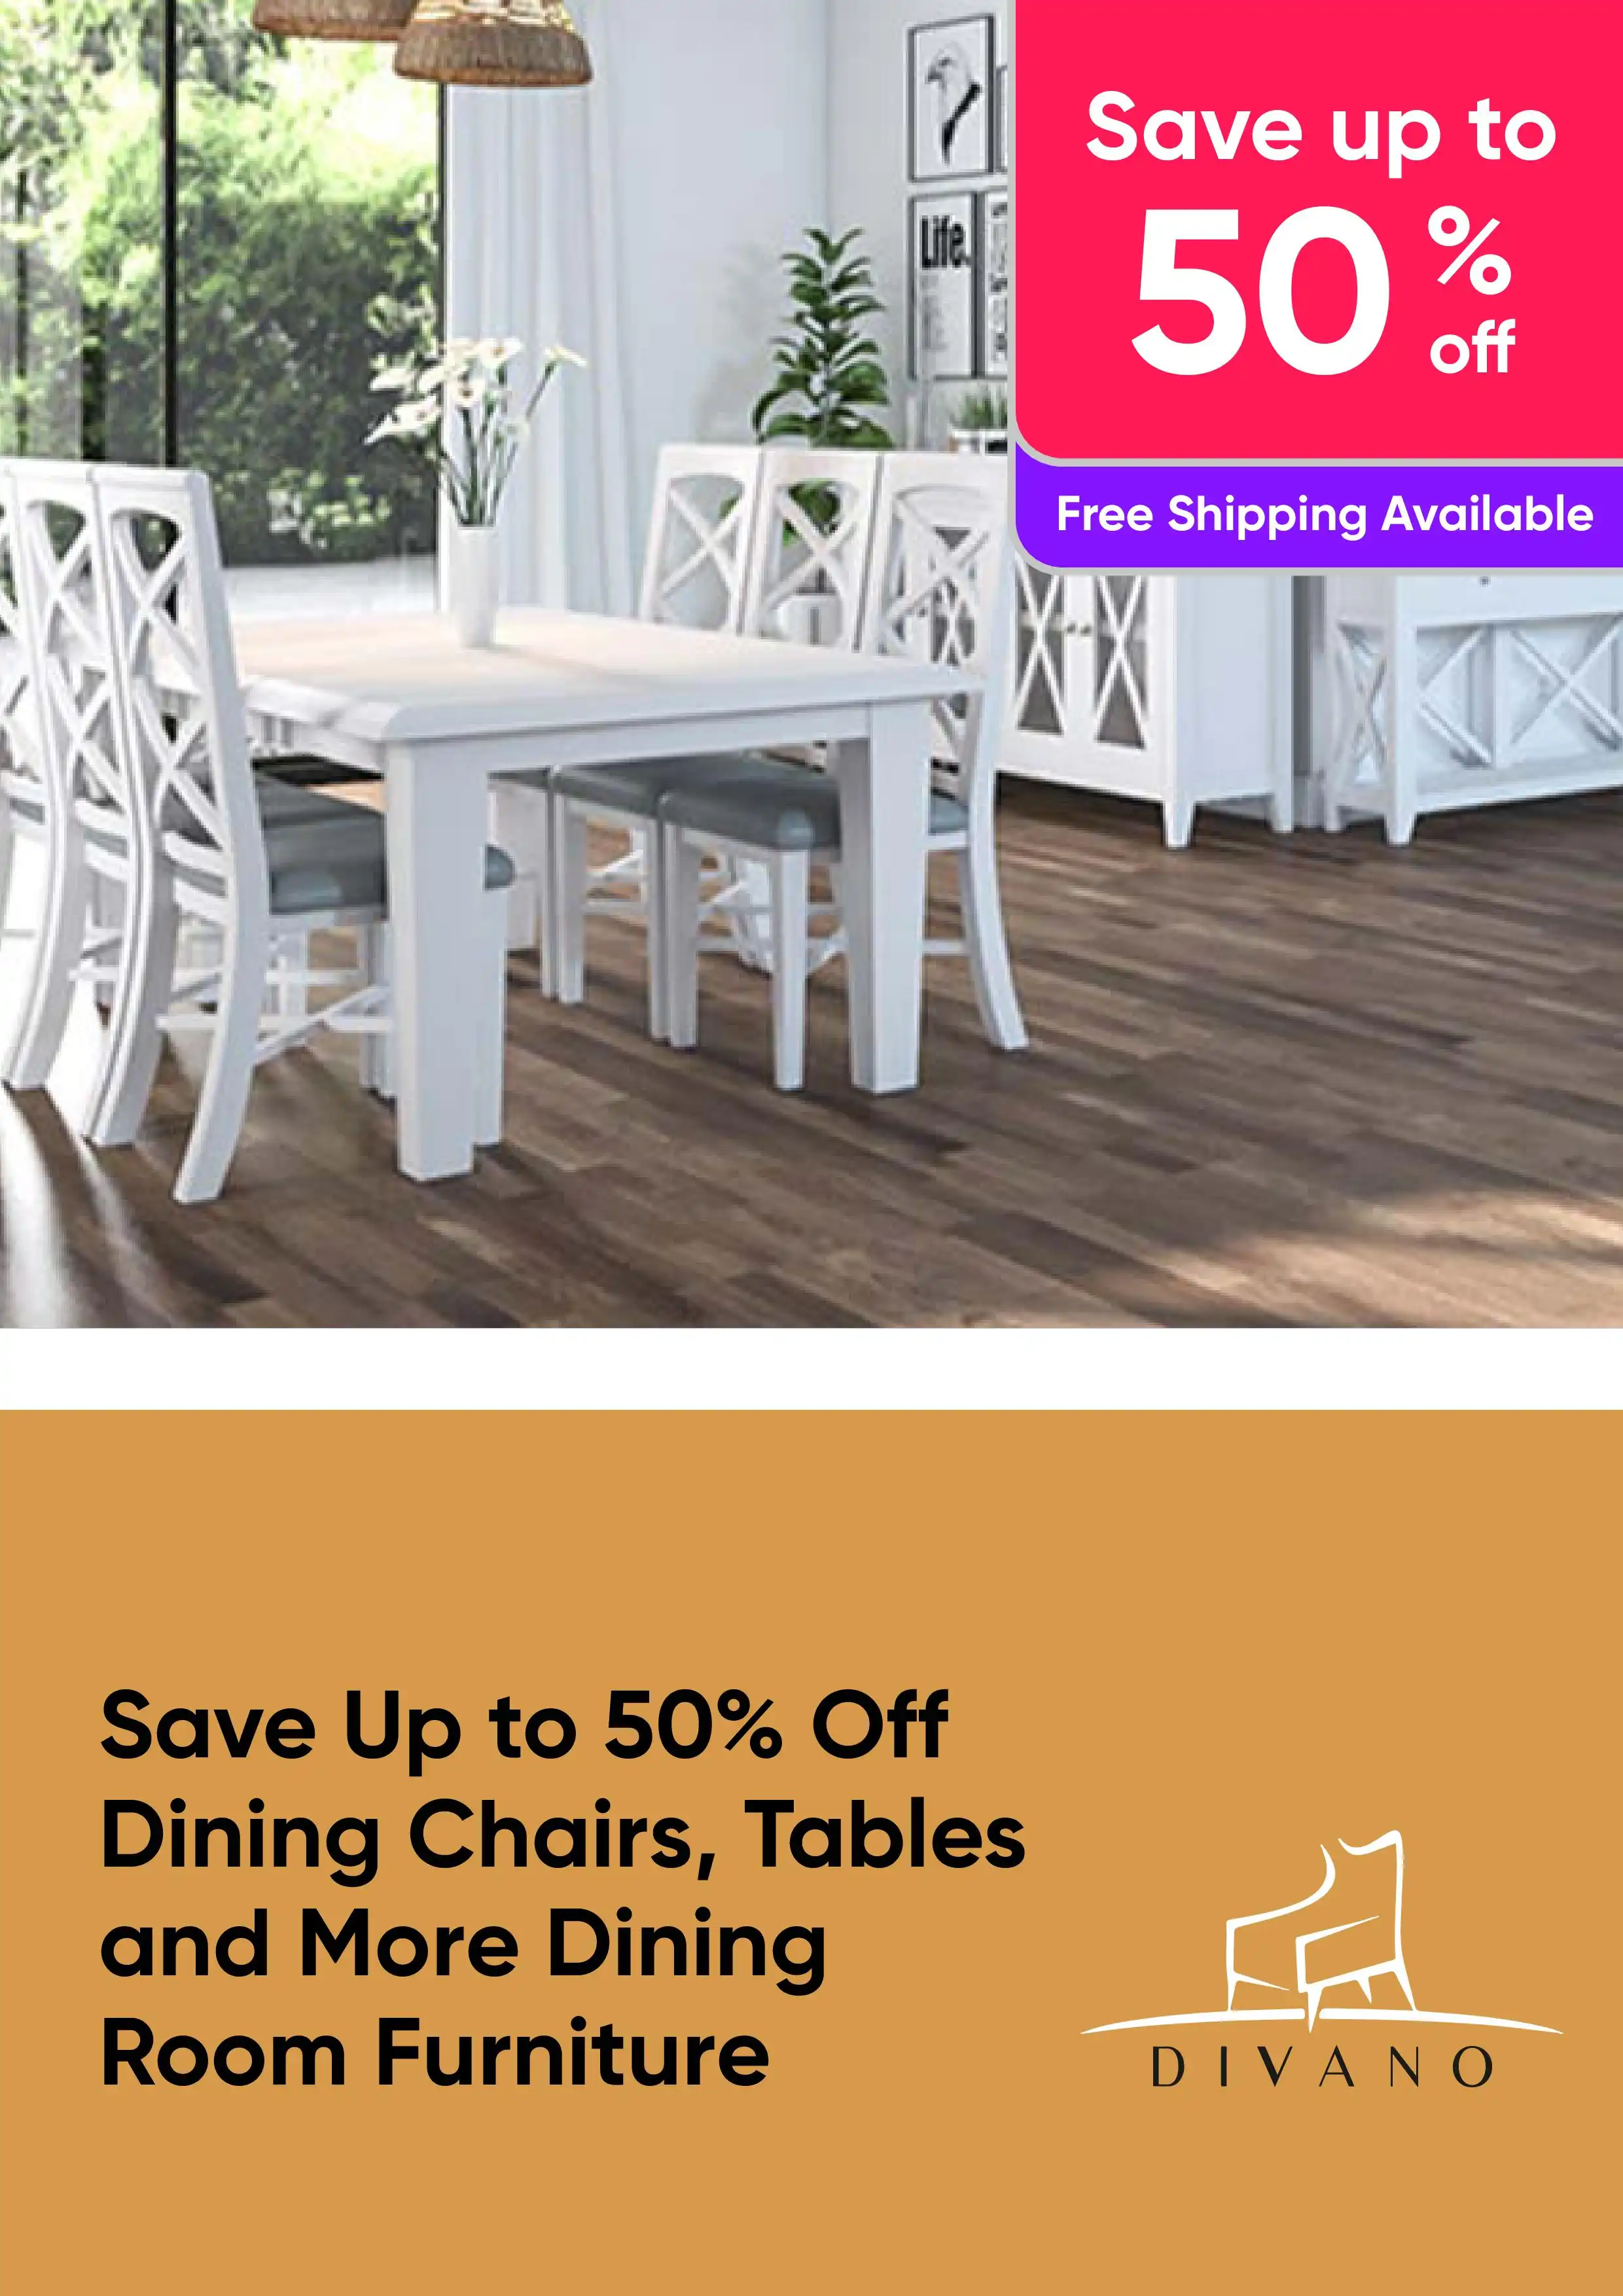 Save Up to 50% Off Dining Chairs, Tables and More Dinging Room Furniture by Divano